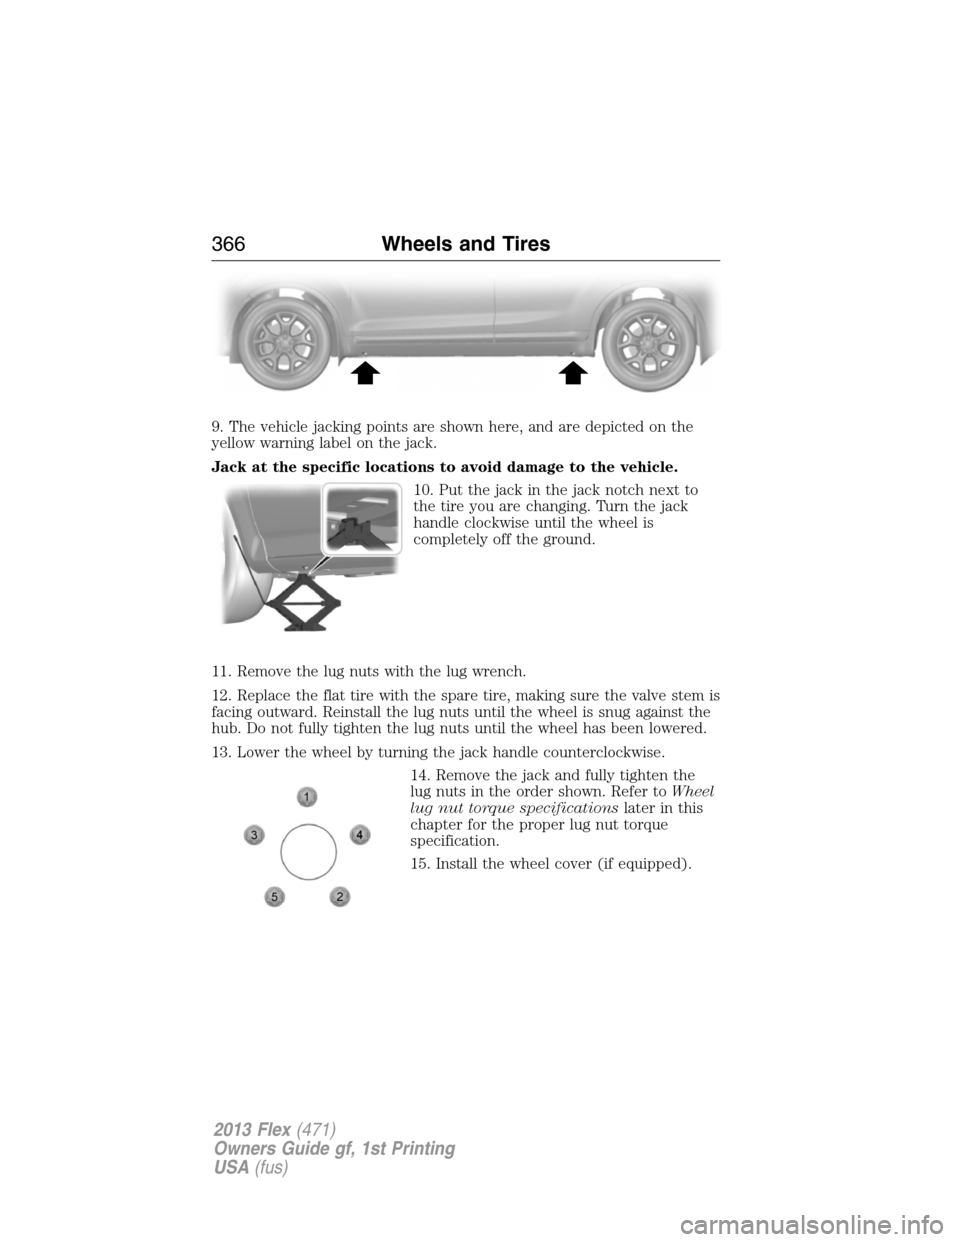 FORD FLEX 2013 1.G Owners Manual 9. The vehicle jacking points are shown here, and are depicted on the
yellow warning label on the jack.
Jack at the specific locations to avoid damage to the vehicle.
10. Put the jack in the jack notc